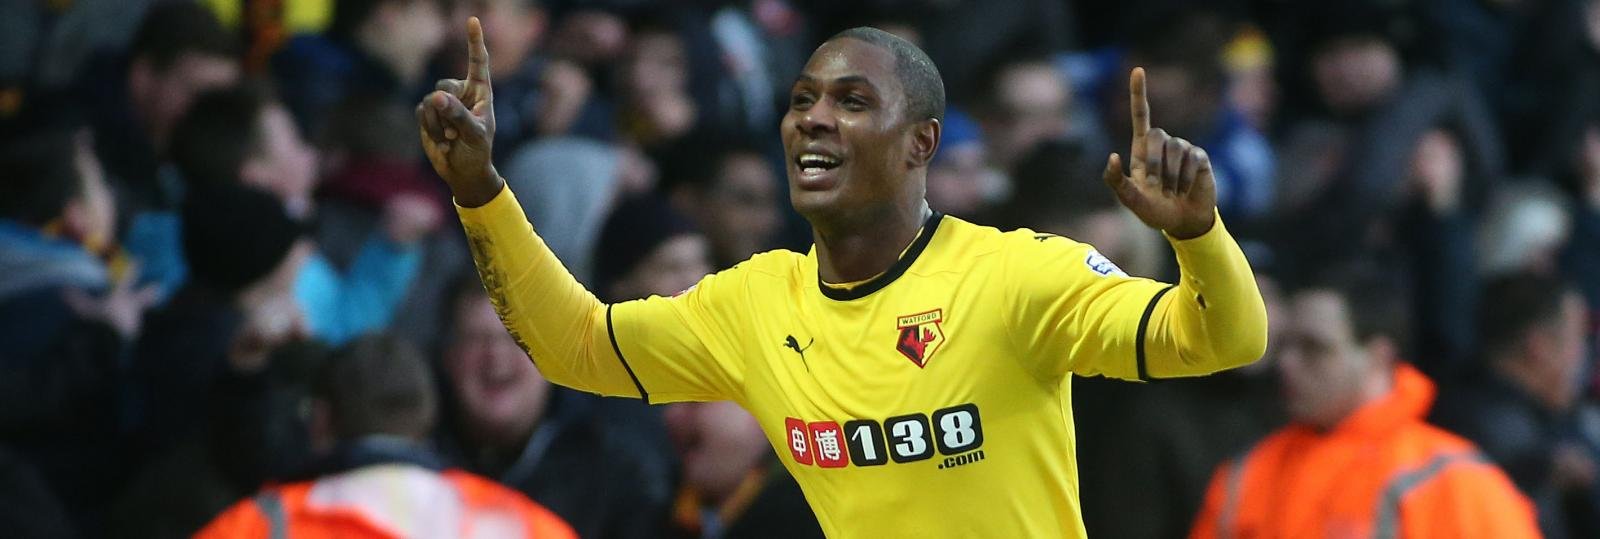 FA Cup Head-to-Head: Yannick Bolasie (Crystal Palace) vs Odion Ighalo (Watford)